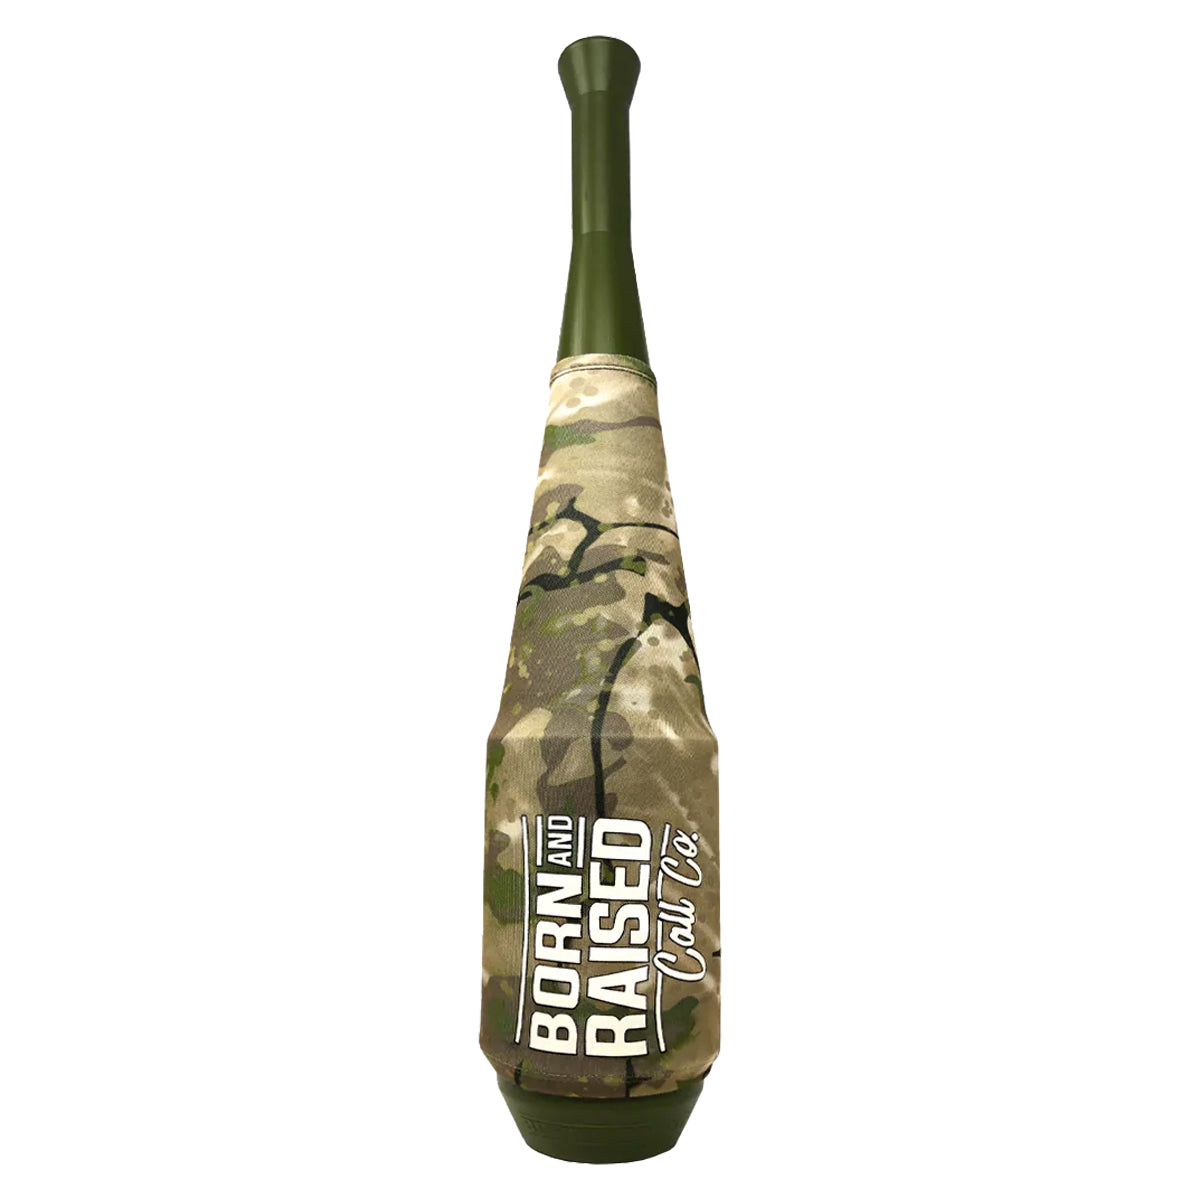 Born and Raised Call Co. The Bomb in Camo by GOHUNT | Born and Raised Call Co. - GOHUNT Shop